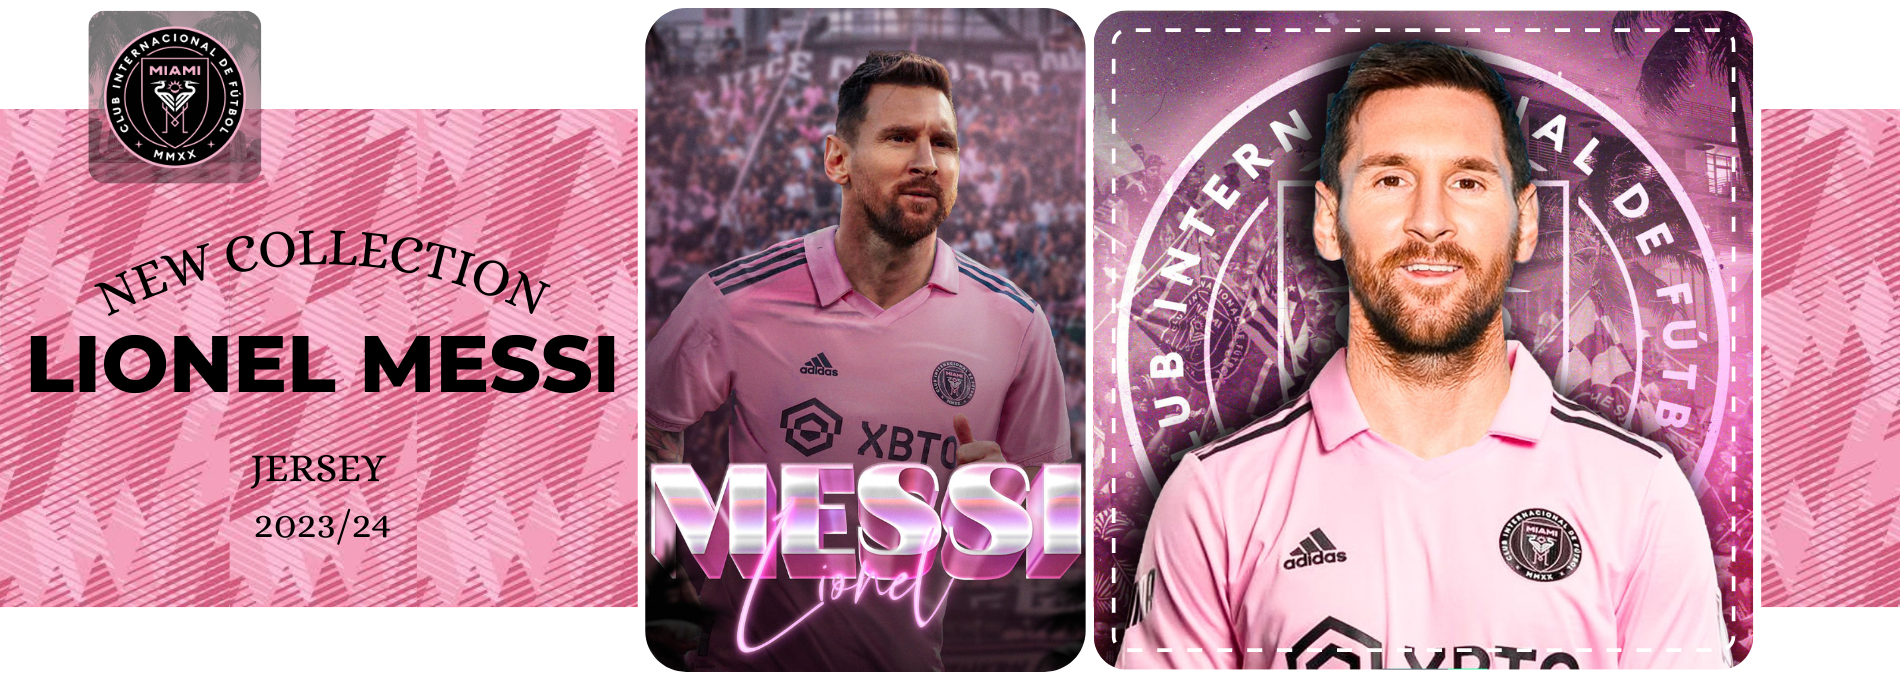 Lionel Messi - Jersey Teams Store